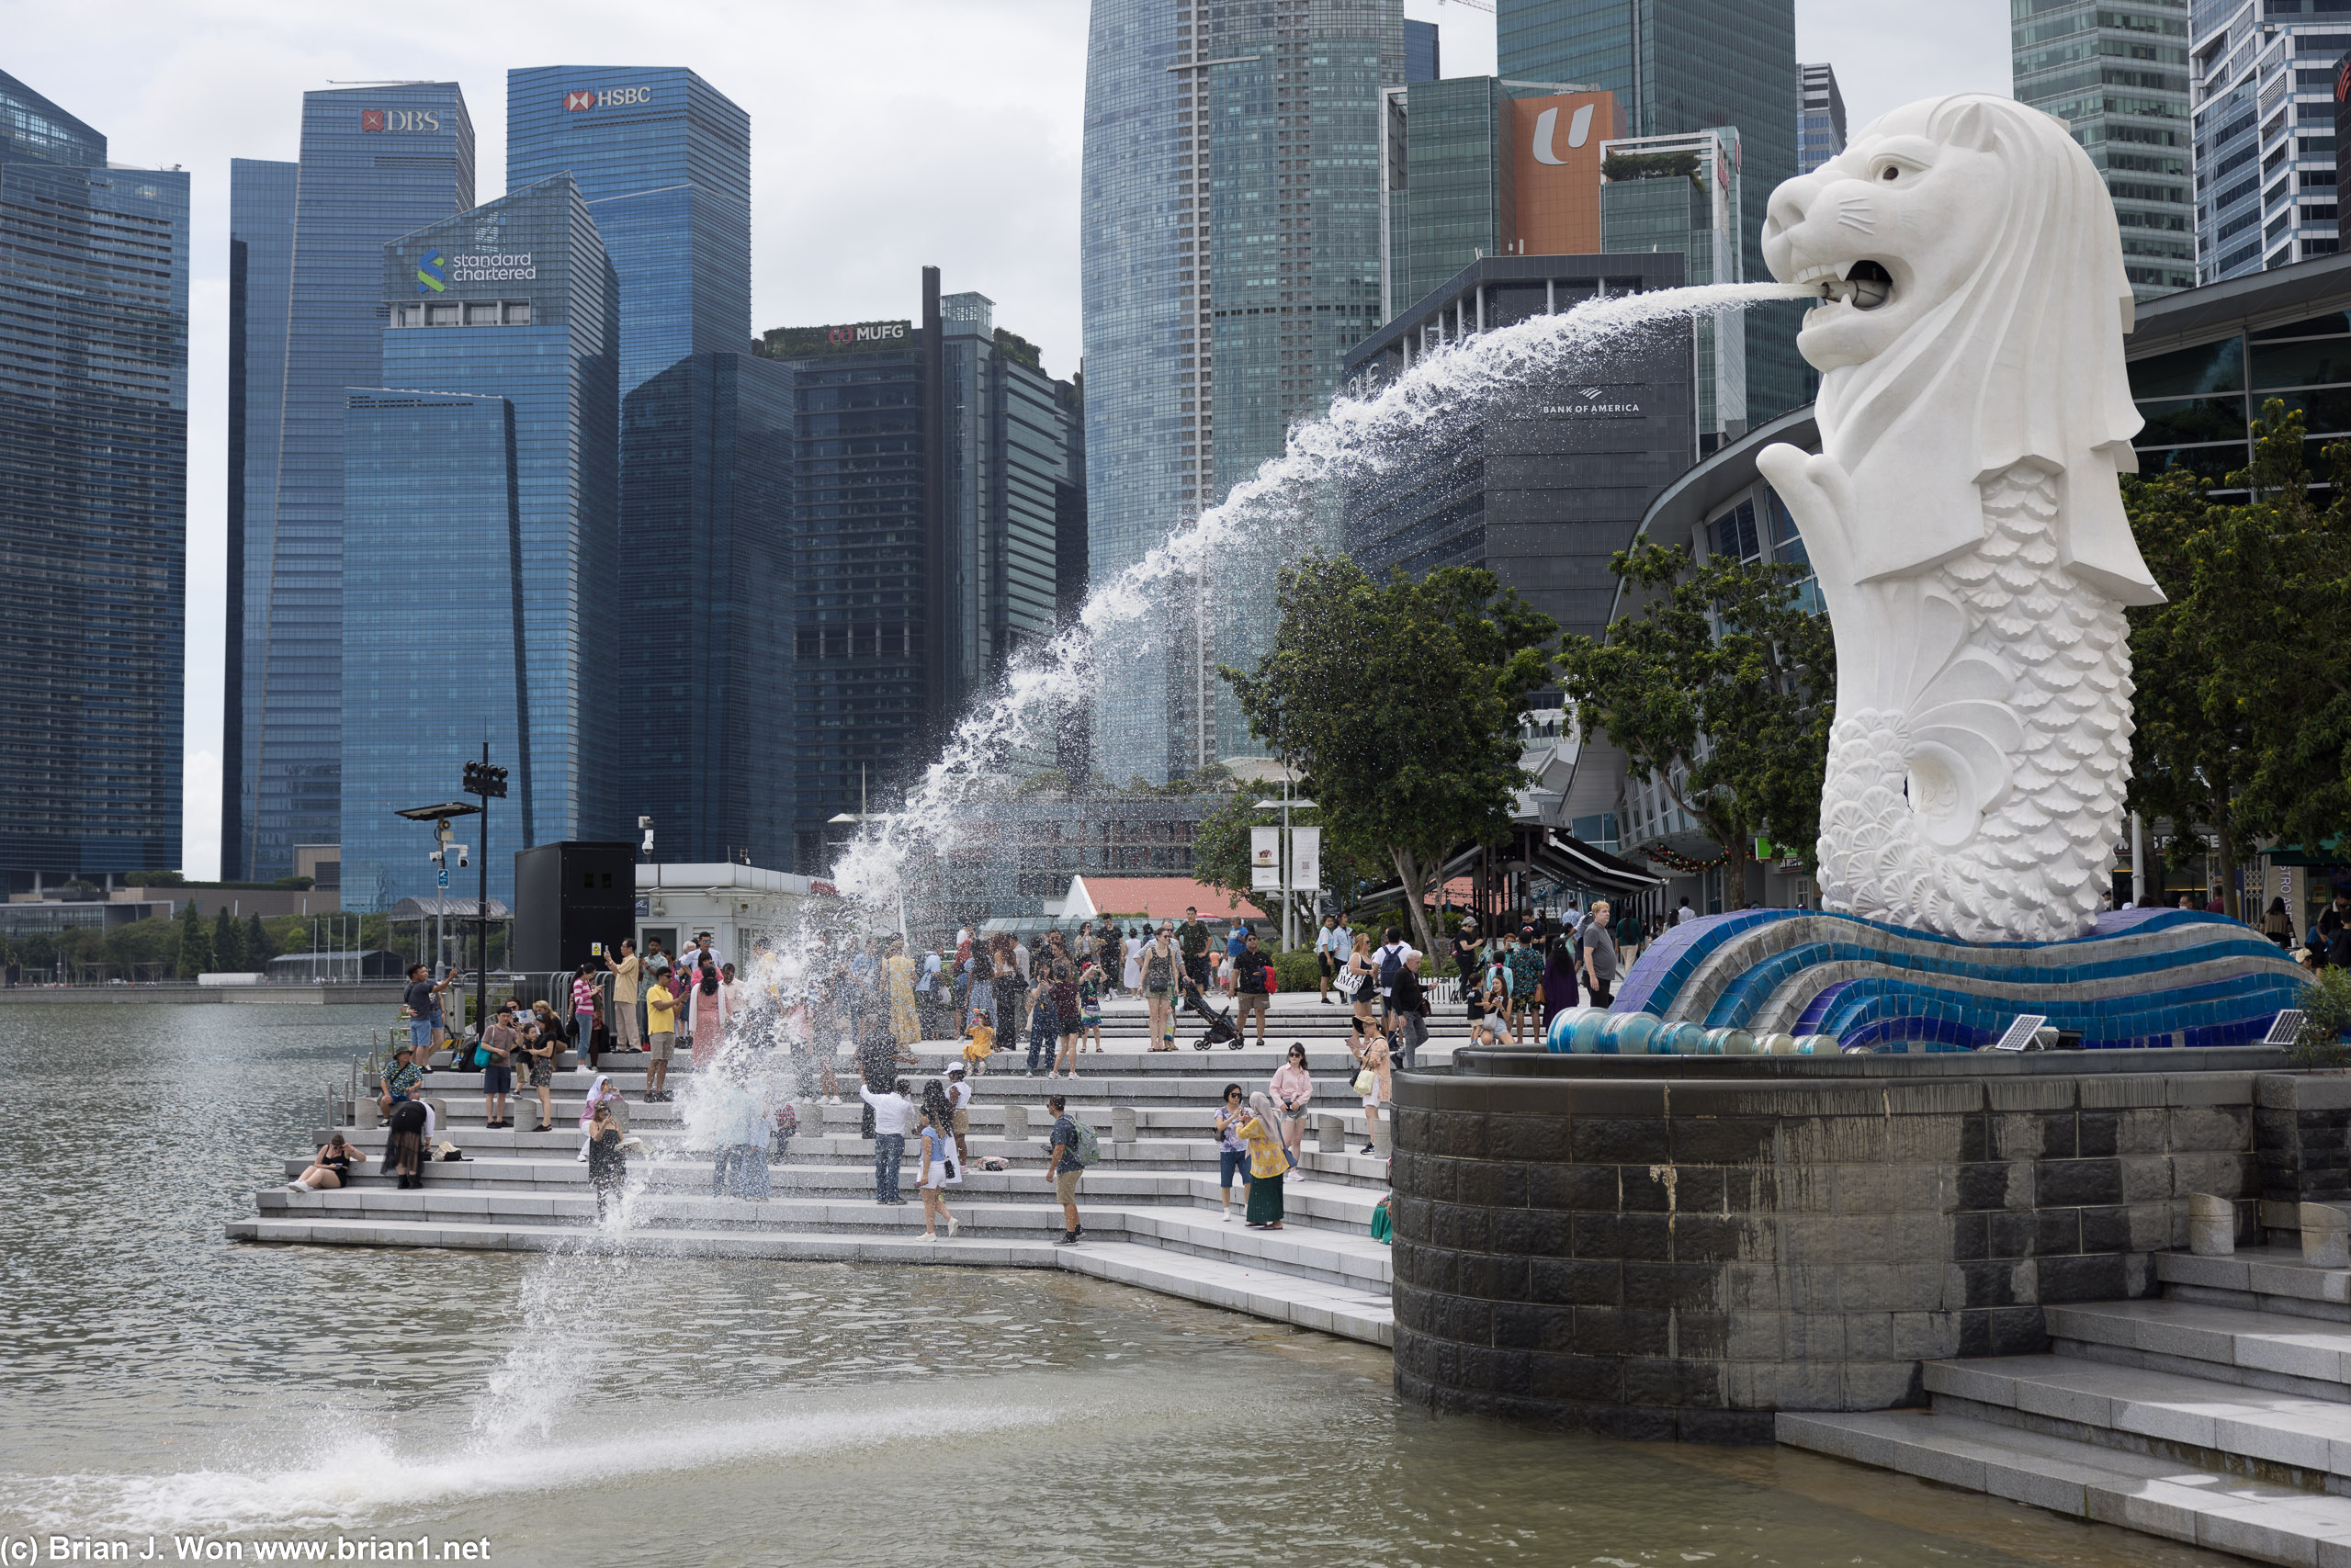 The famous merlion.